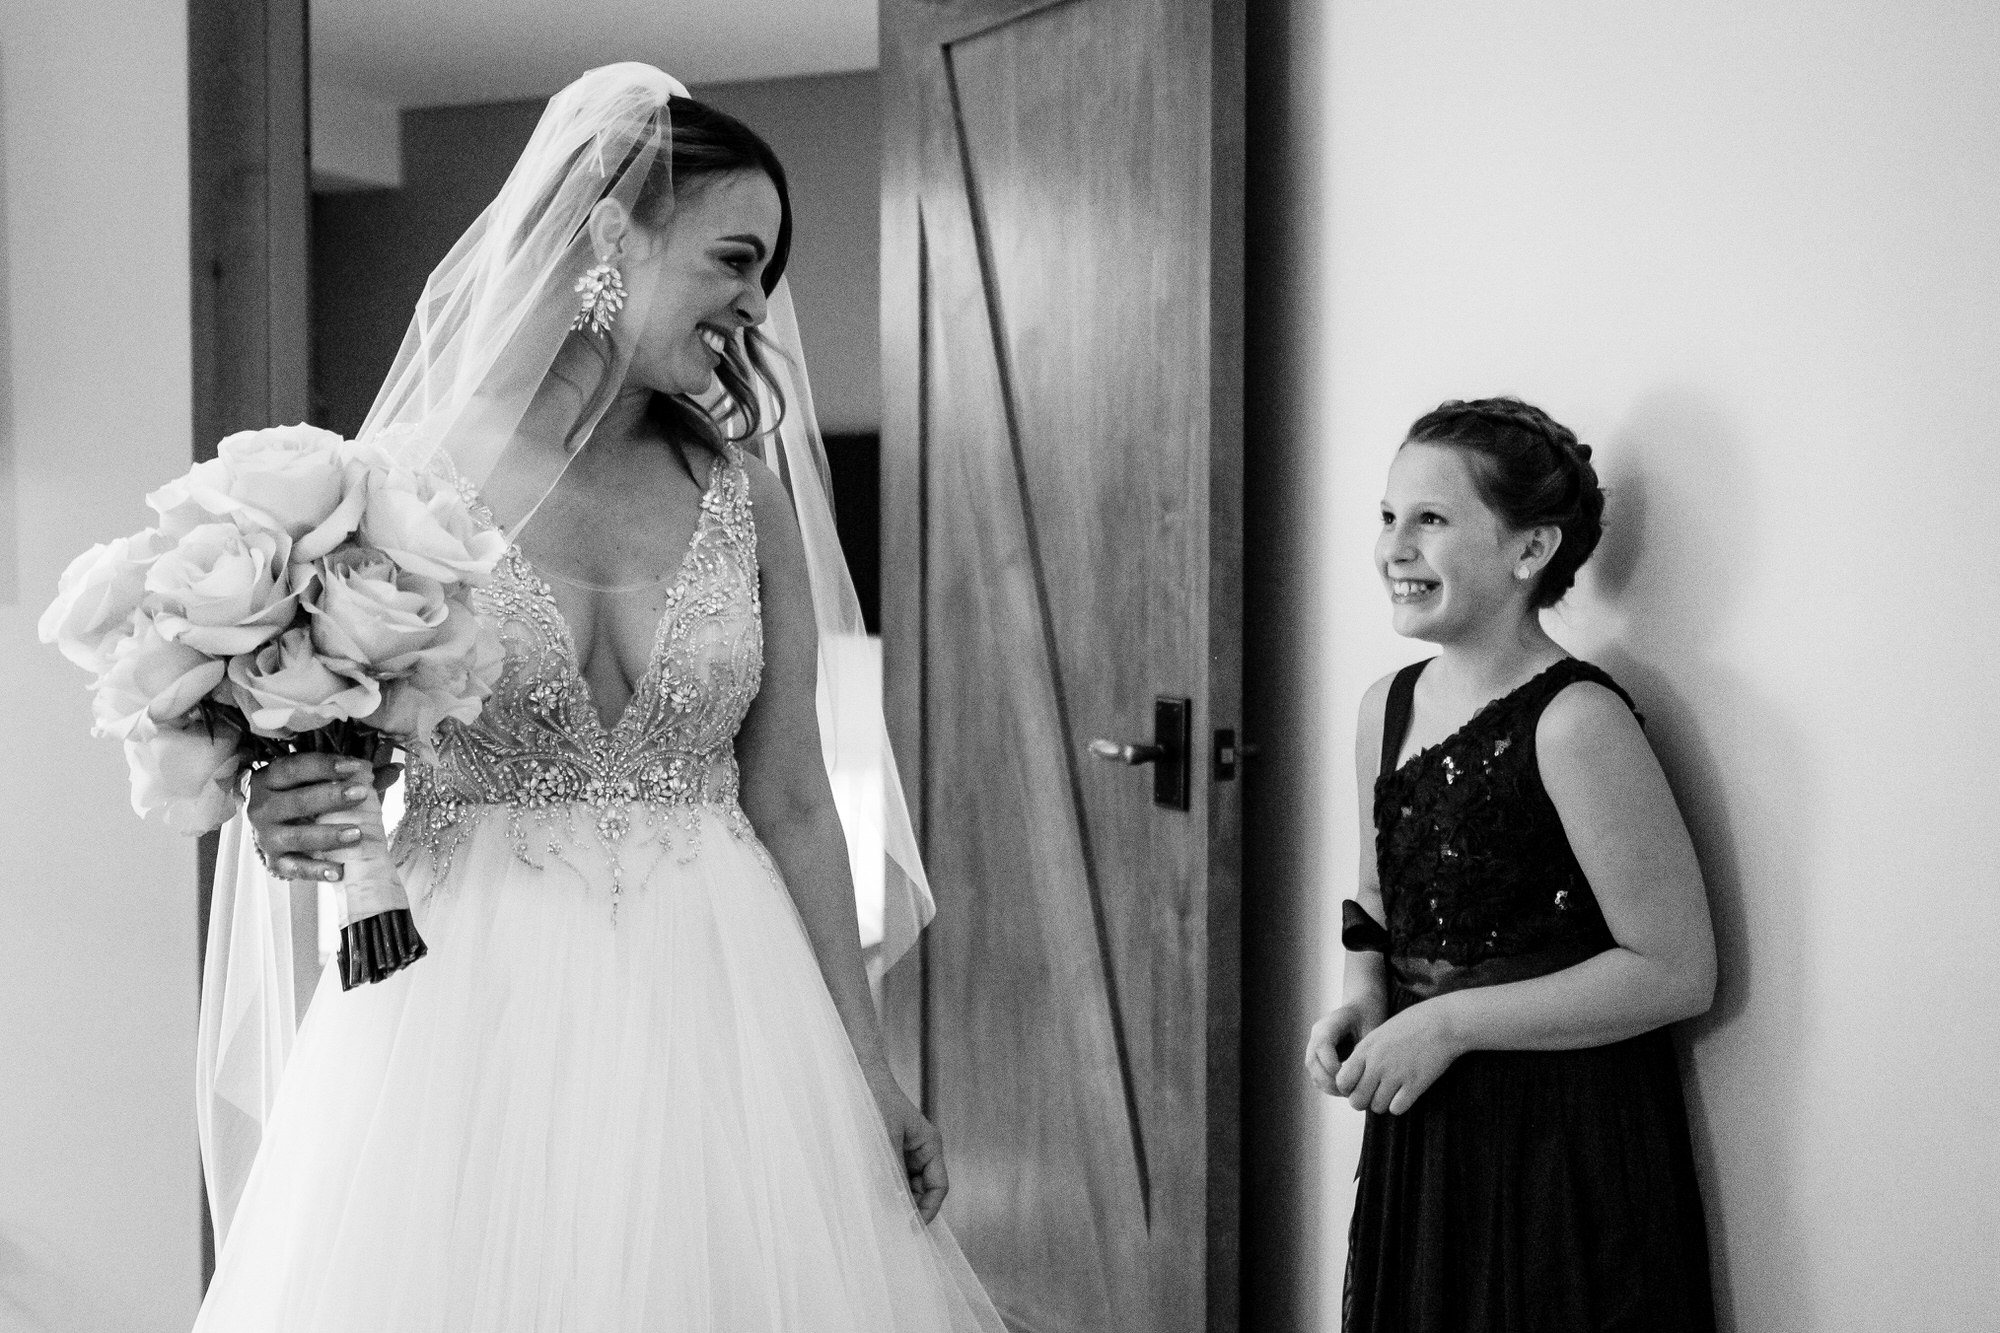 Bride and flower girl looking at each other.